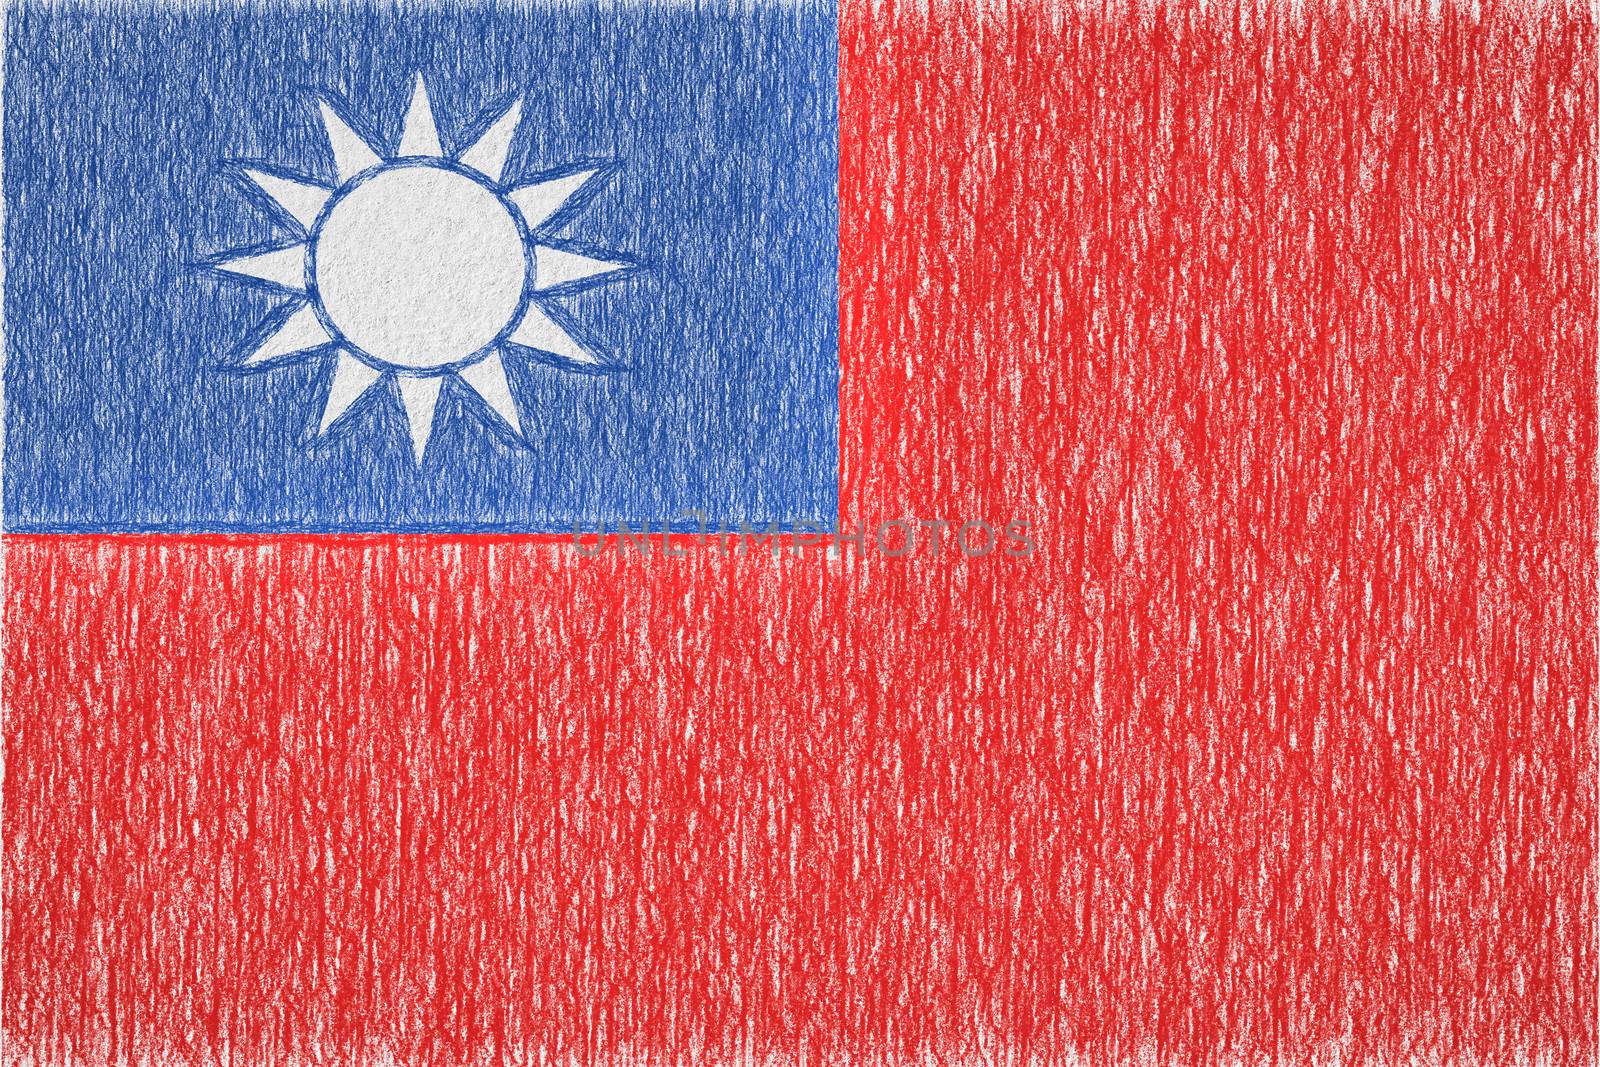 Taiwan painted flag by Visual-Content